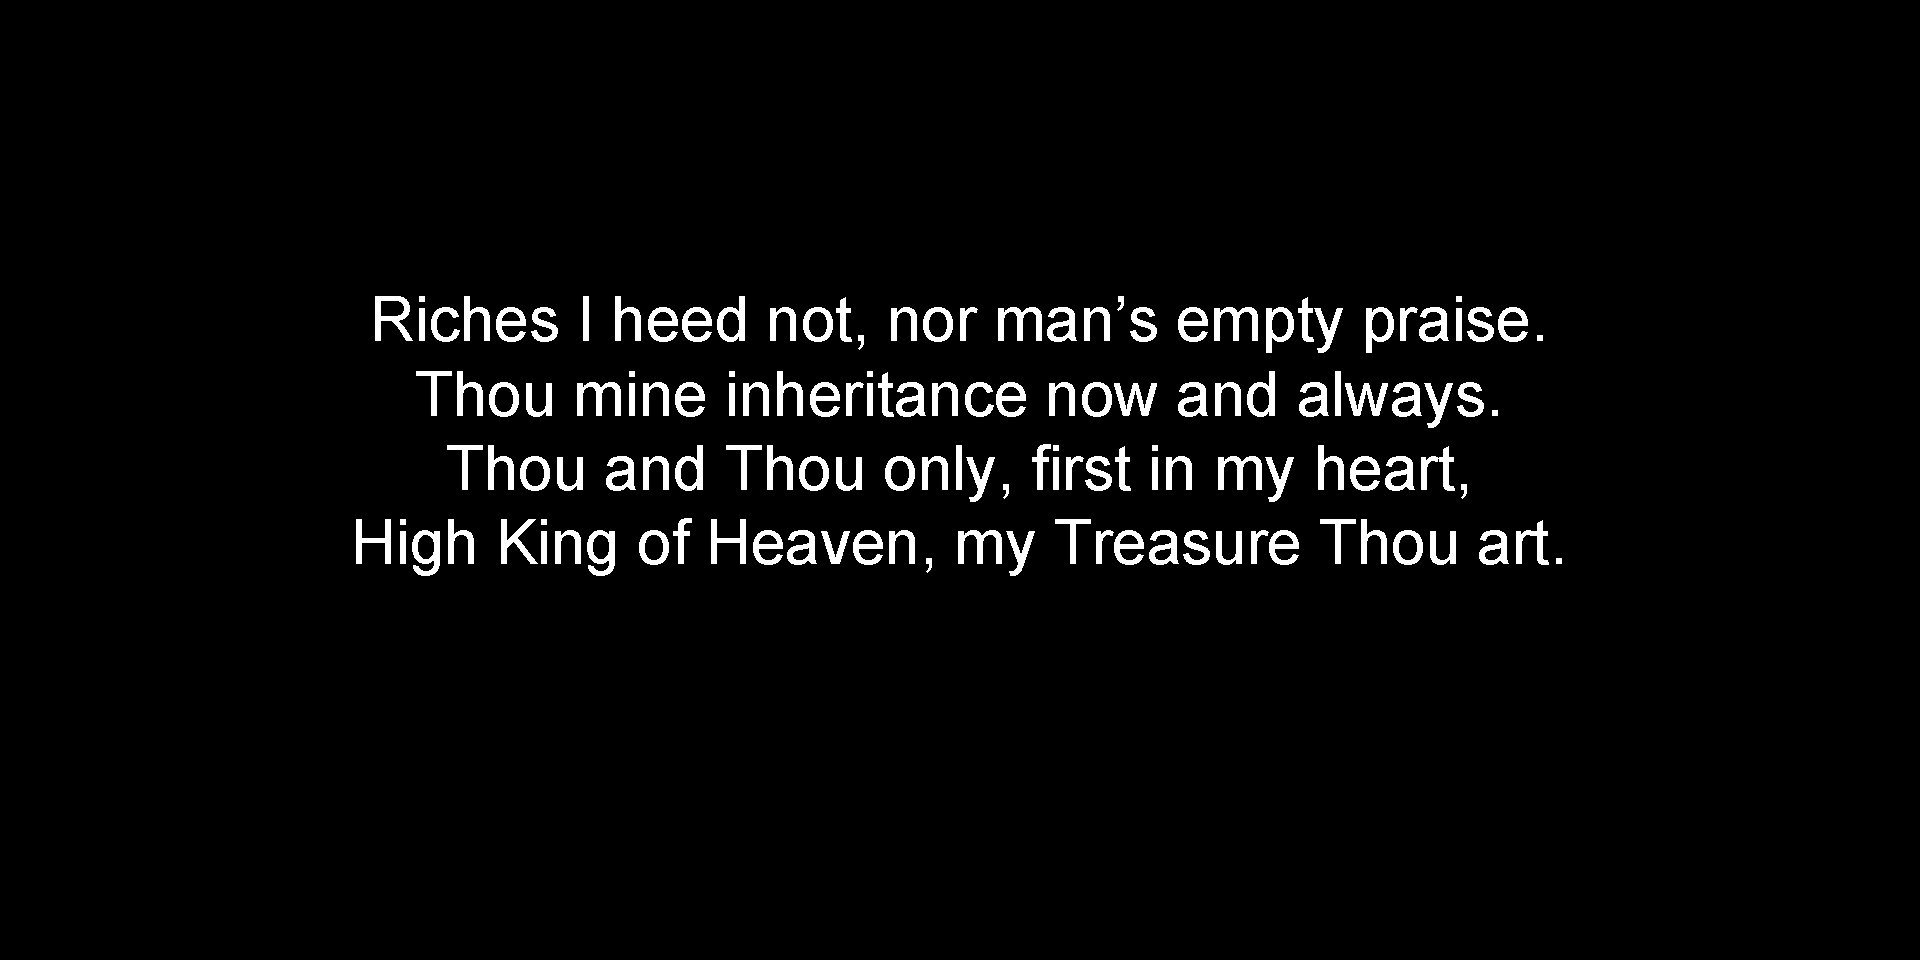 Riches I heed not, nor man’s empty praise. Thou mine inheritance now and always.